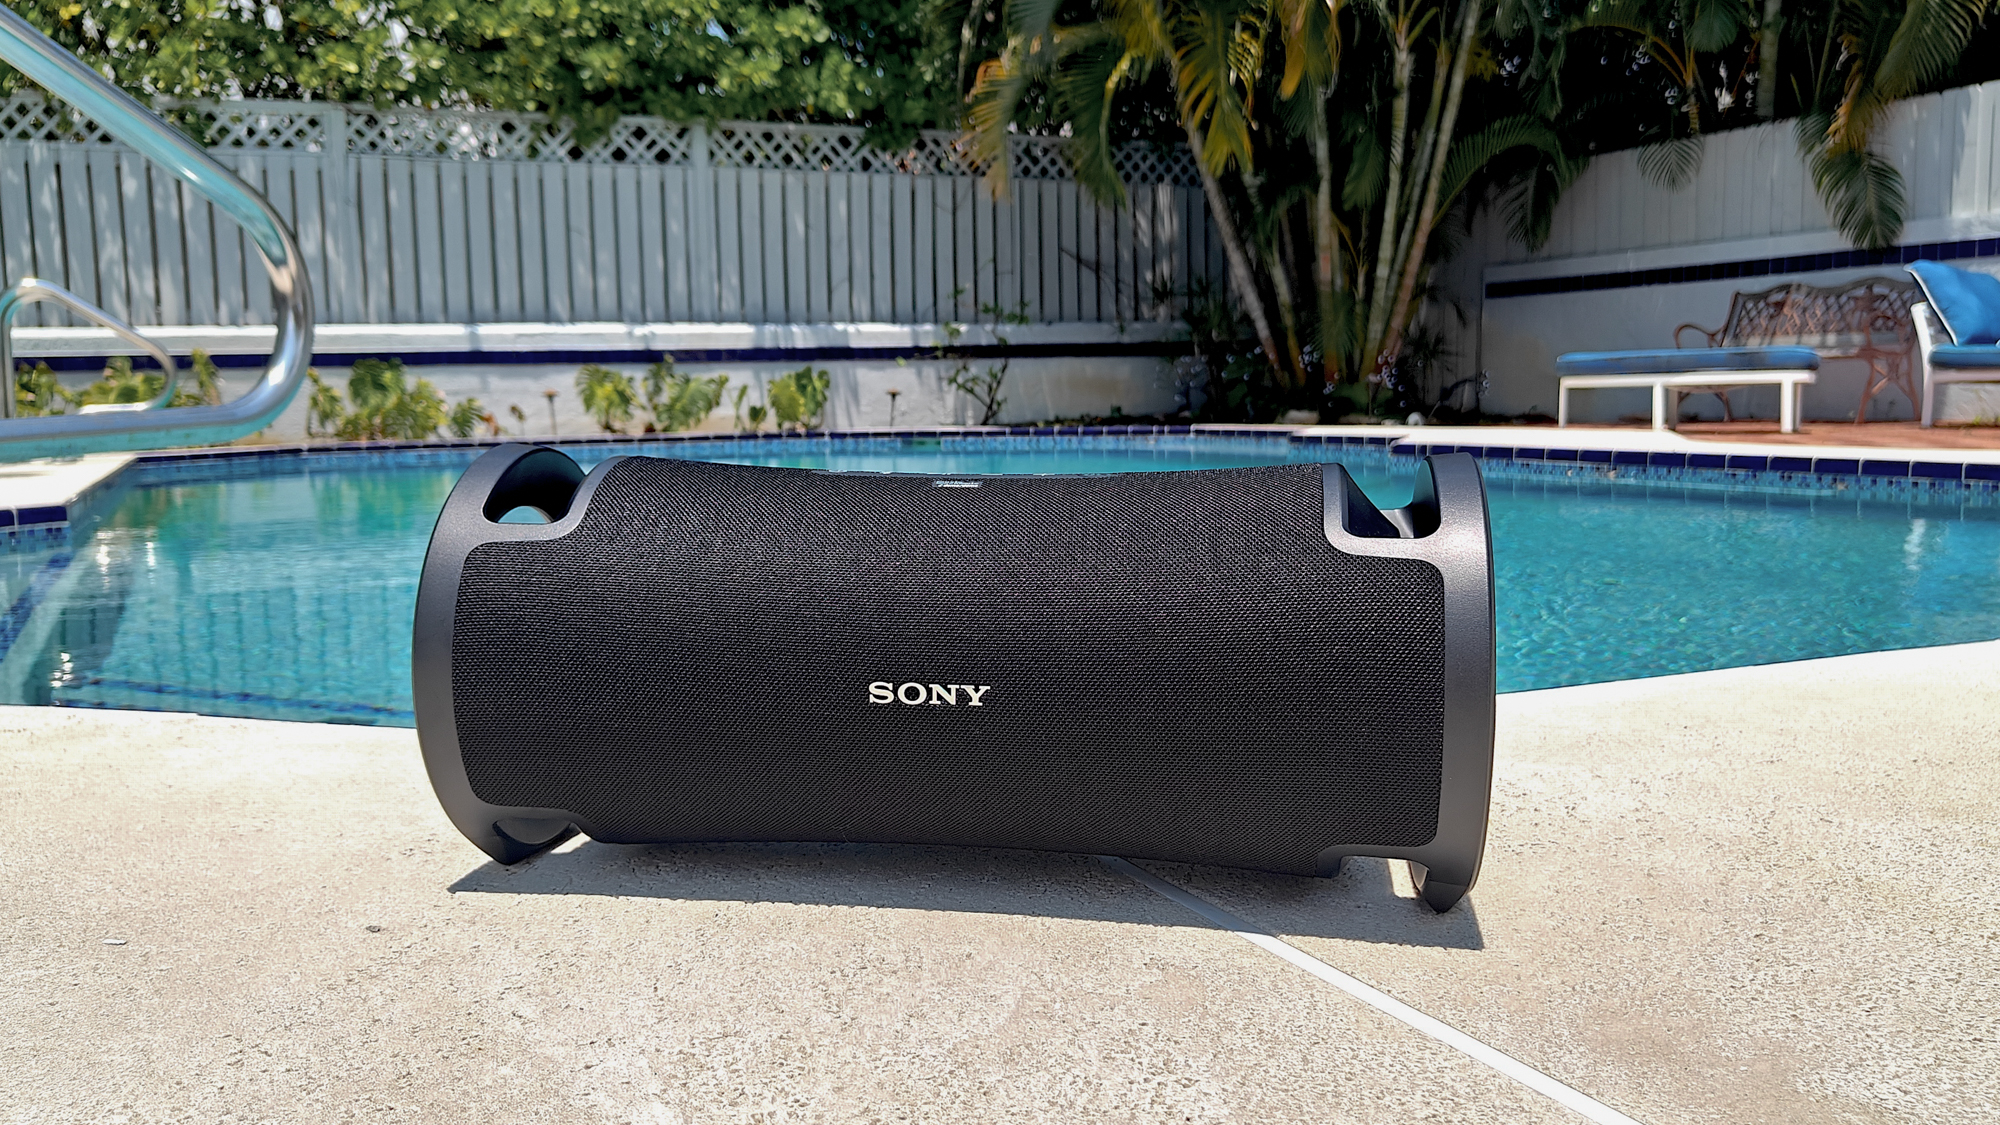 Sony ULT Field 7 outdoors by a pool listing image